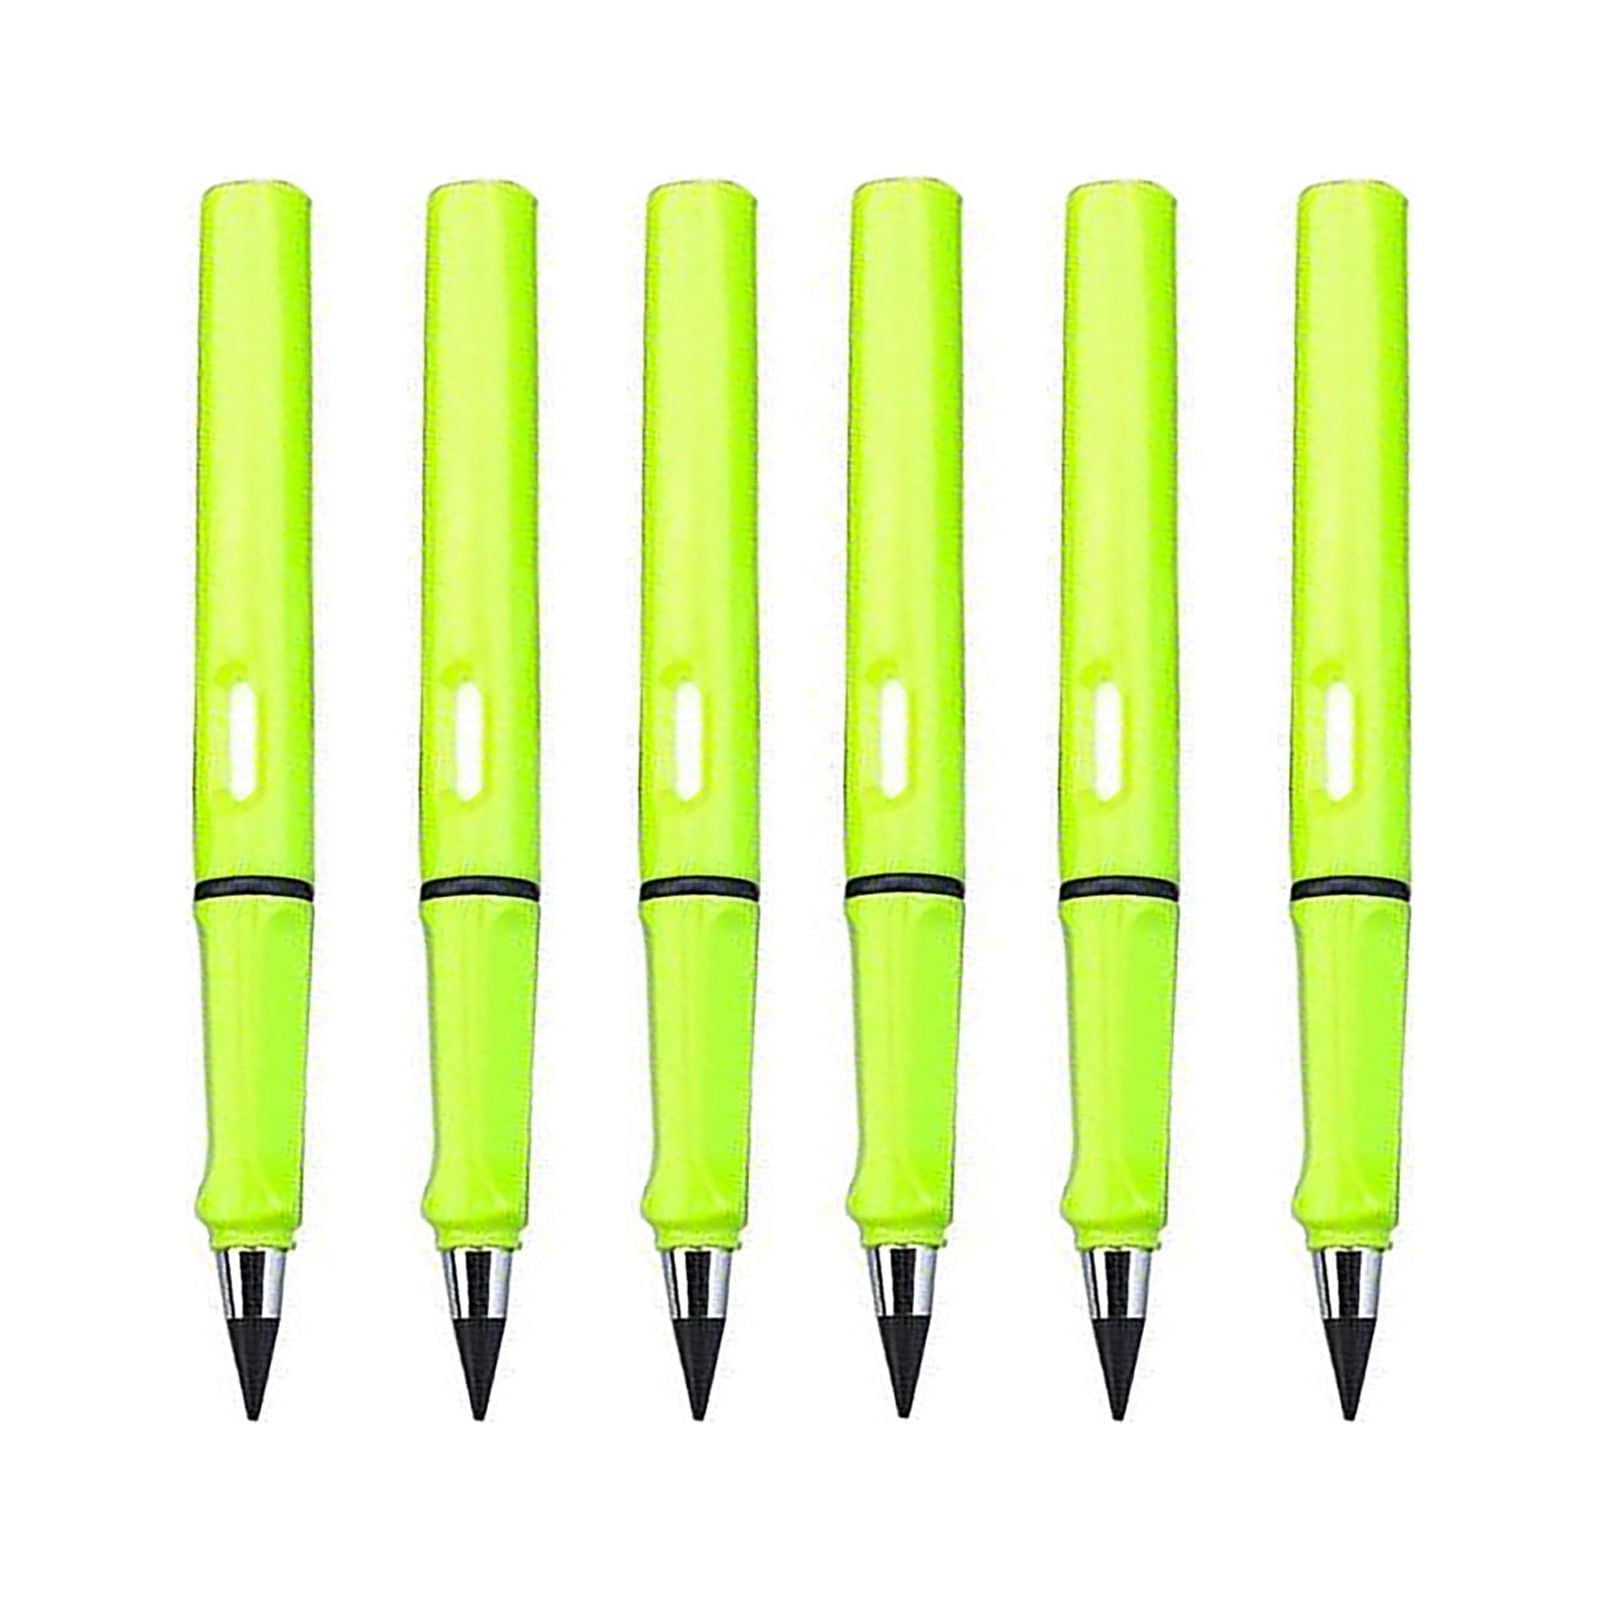 Source 6 Colors Everlasting Pencil Inkless Pencil Eternal Pen Unlimited  Writing Pencil on m.